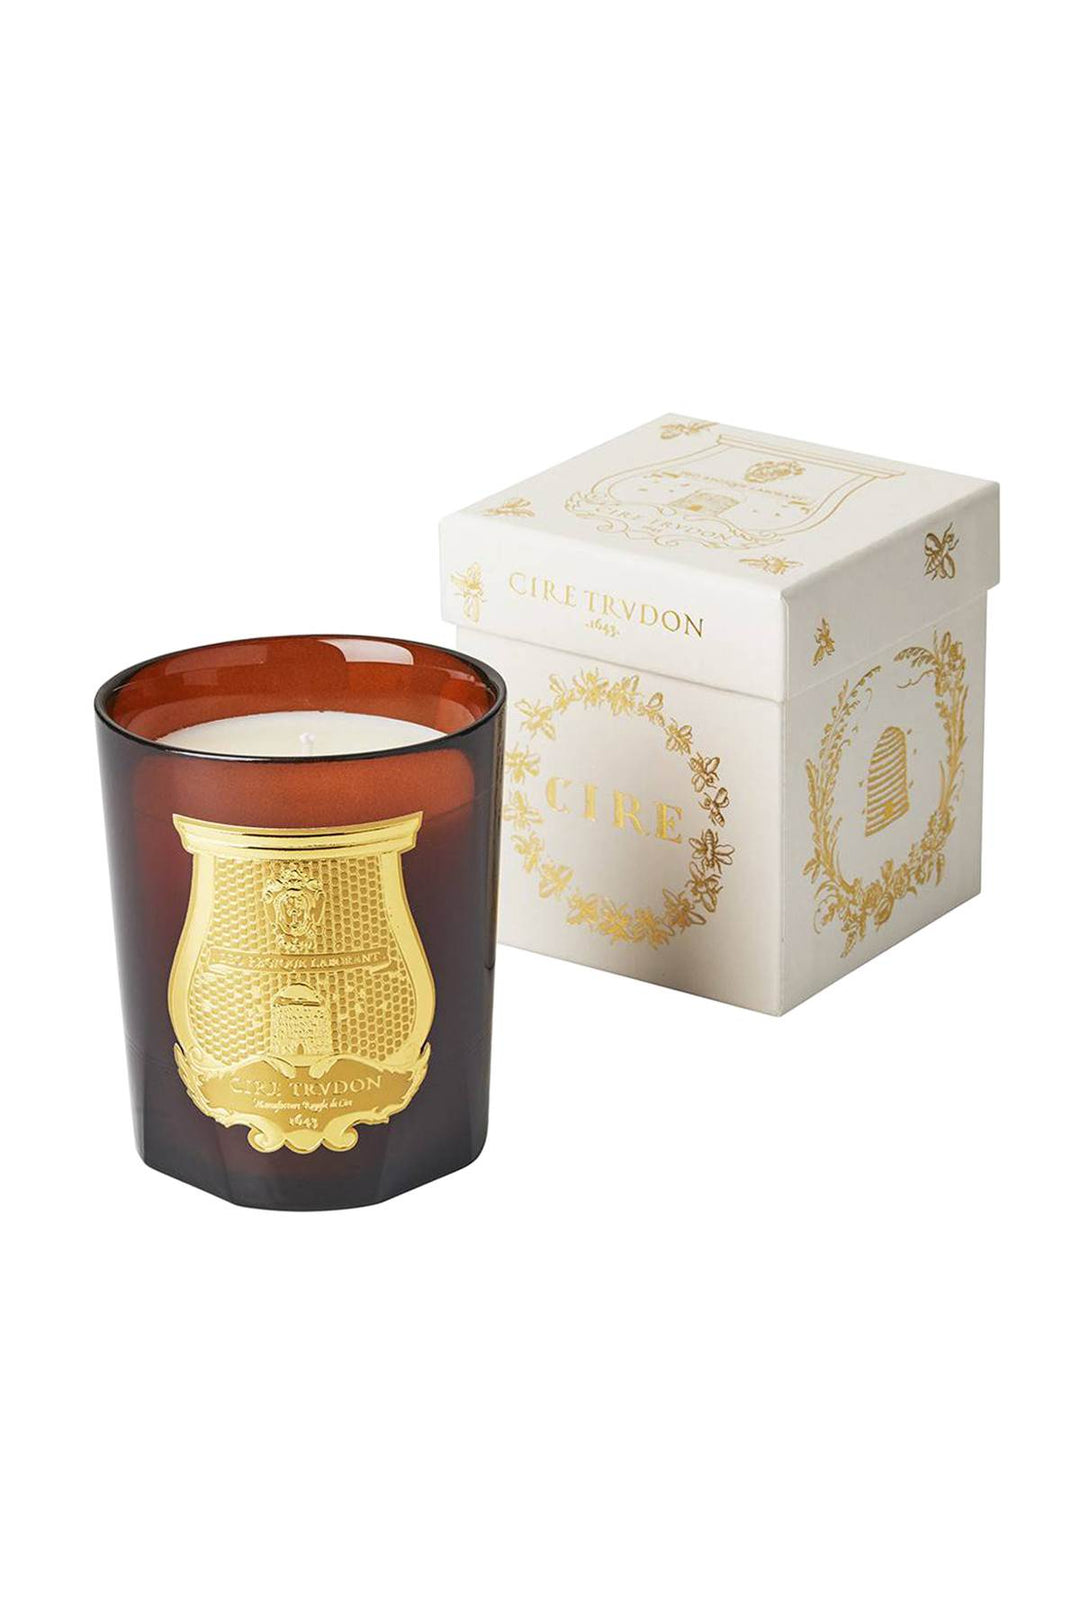 Cire trvdon scented candle cire --1